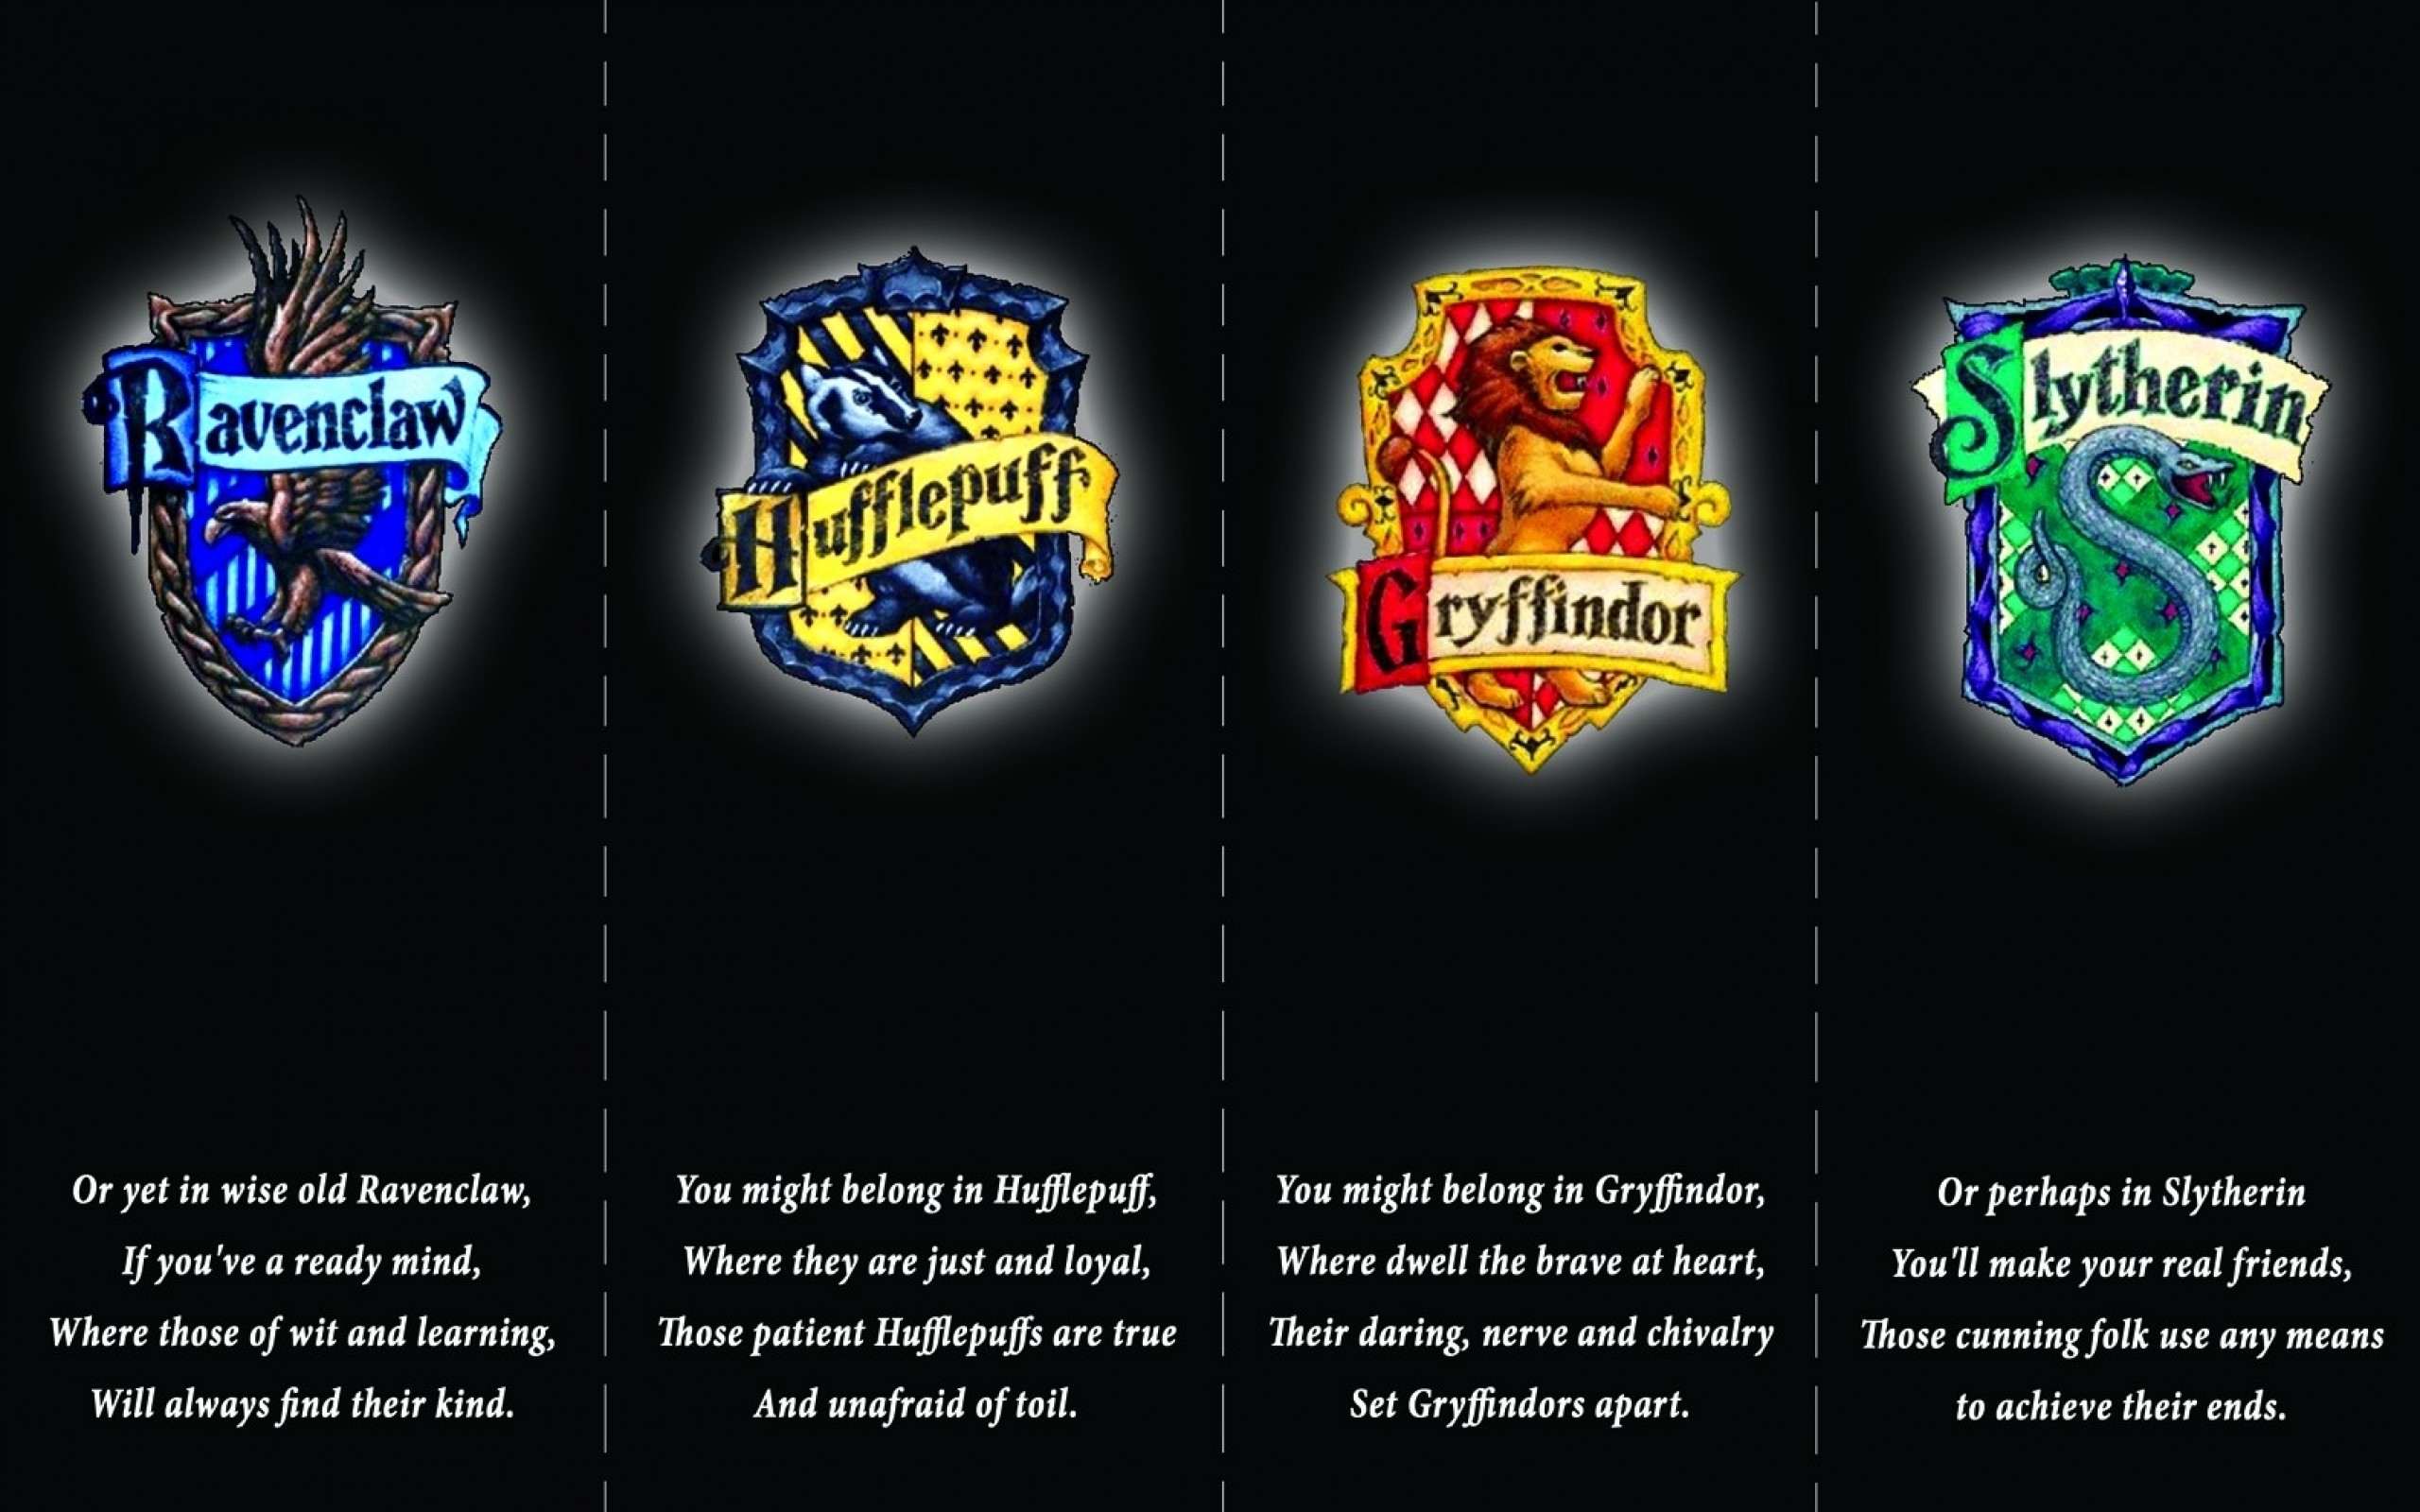 Gryffindor Laptop Wallpapers  Top Free Gryffindor Laptop Backgrounds   WallpaperAccess